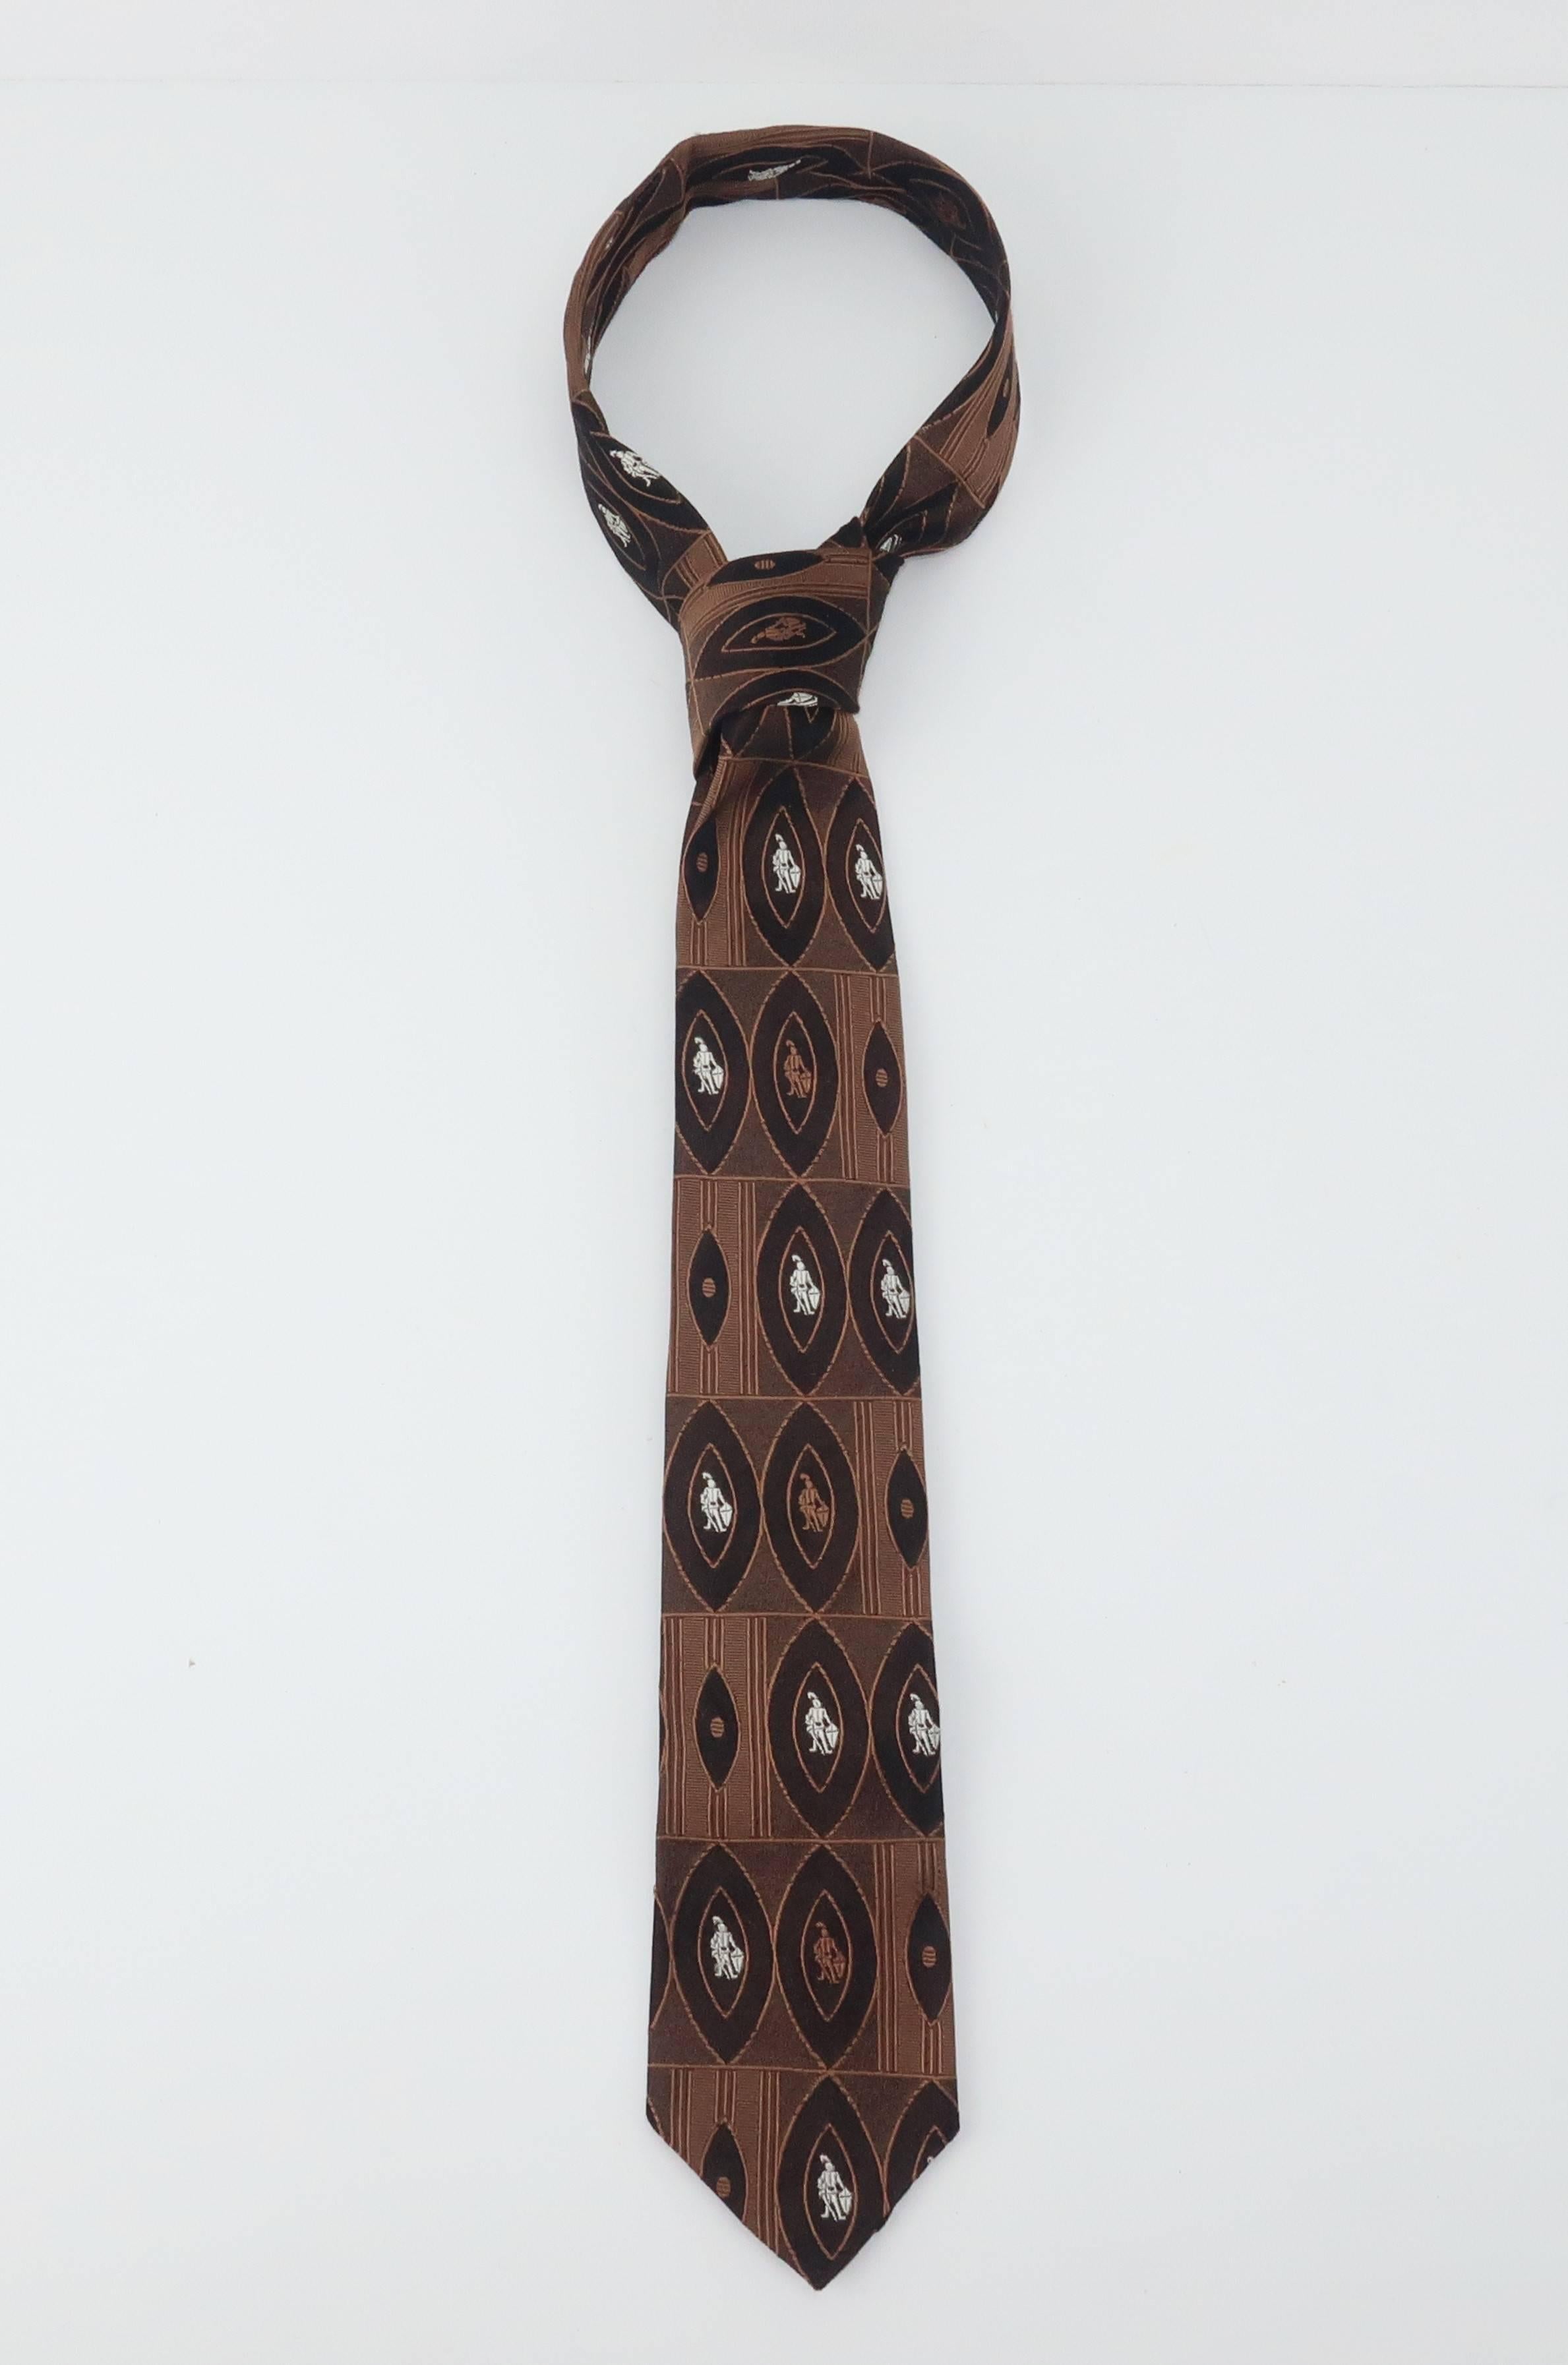 Skinny neckties became the rage in the 1950’s.  This chocolate brown silk tie by Arrow sports a graphic pattern serving as frames for knights in suits of armor ... think of it as the masculine version of a cameo. The ‘skinny’ look is great for the